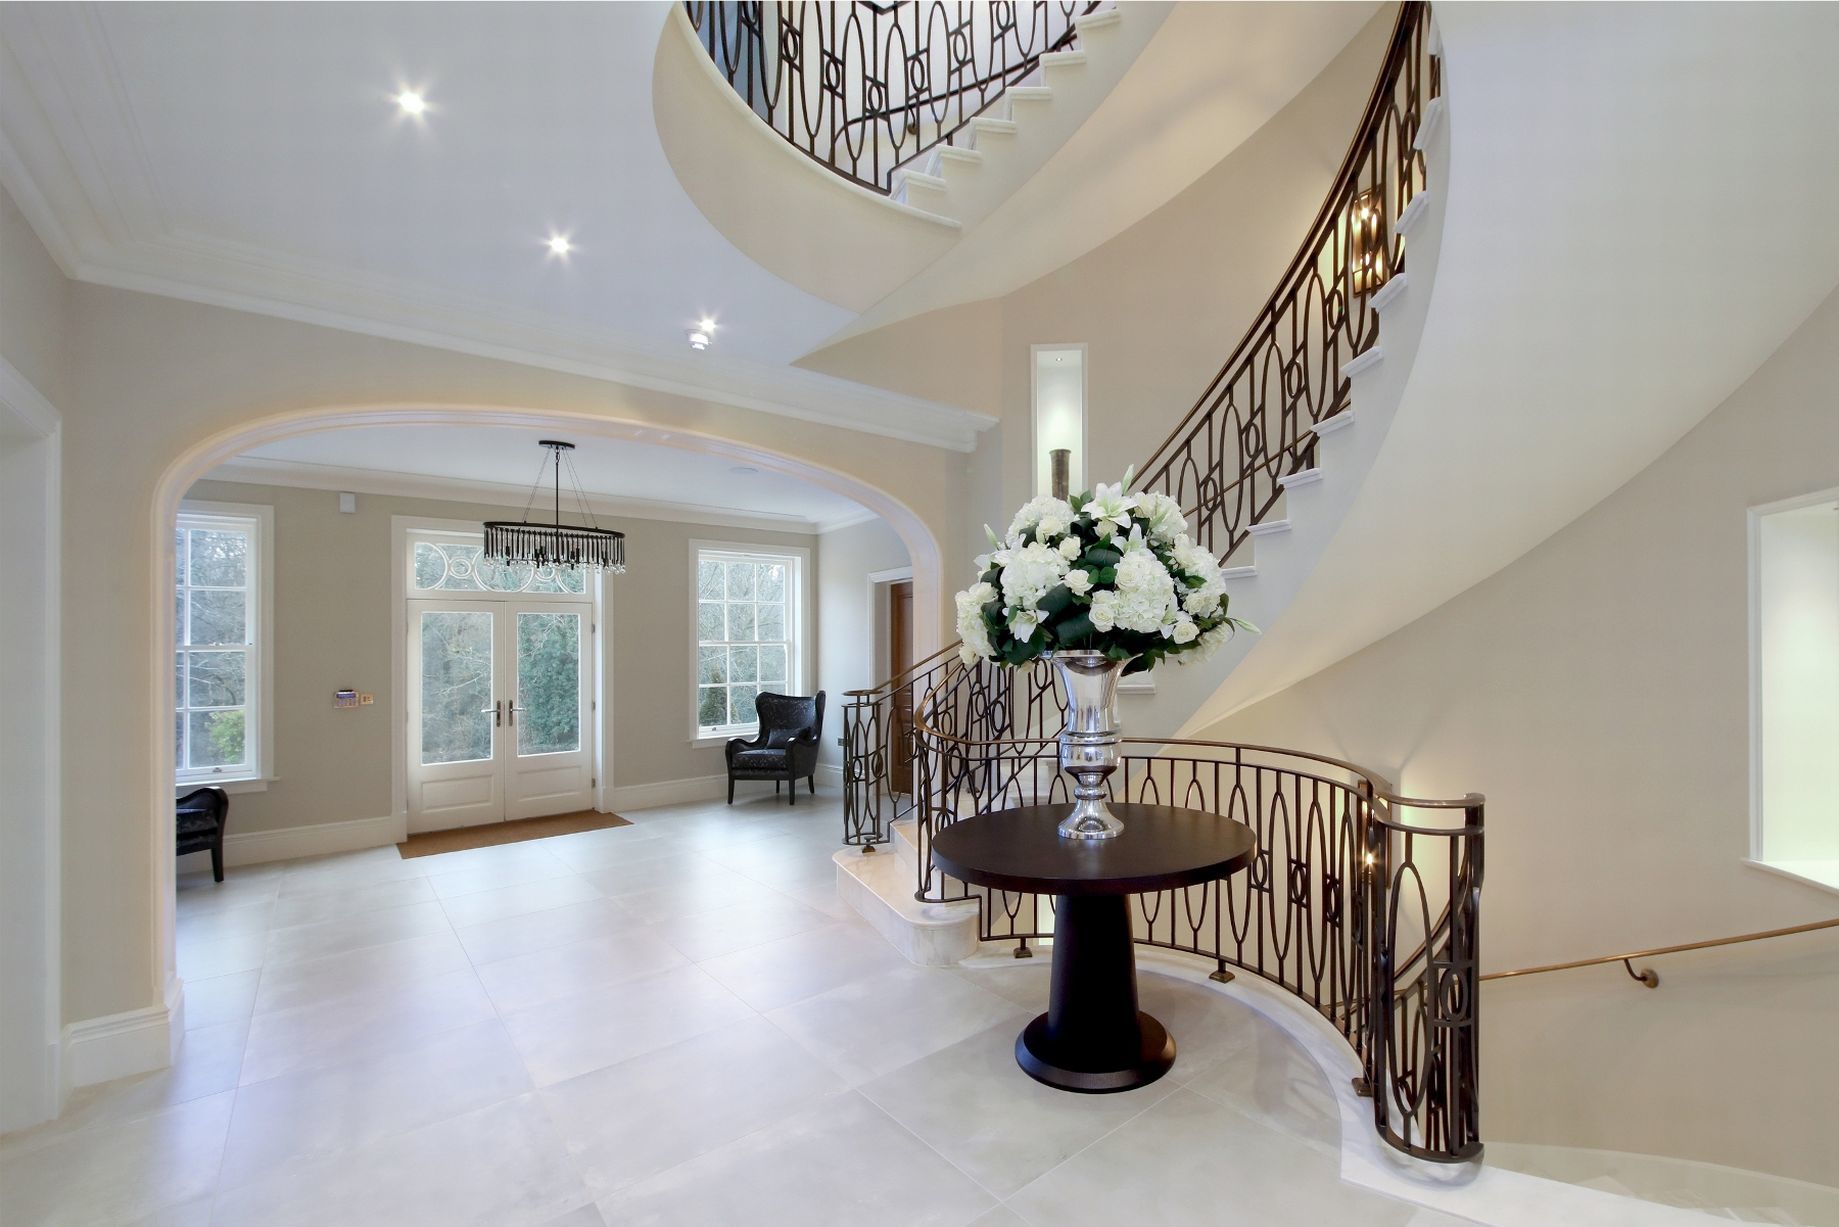 Luxury curved stairs with marble flooring